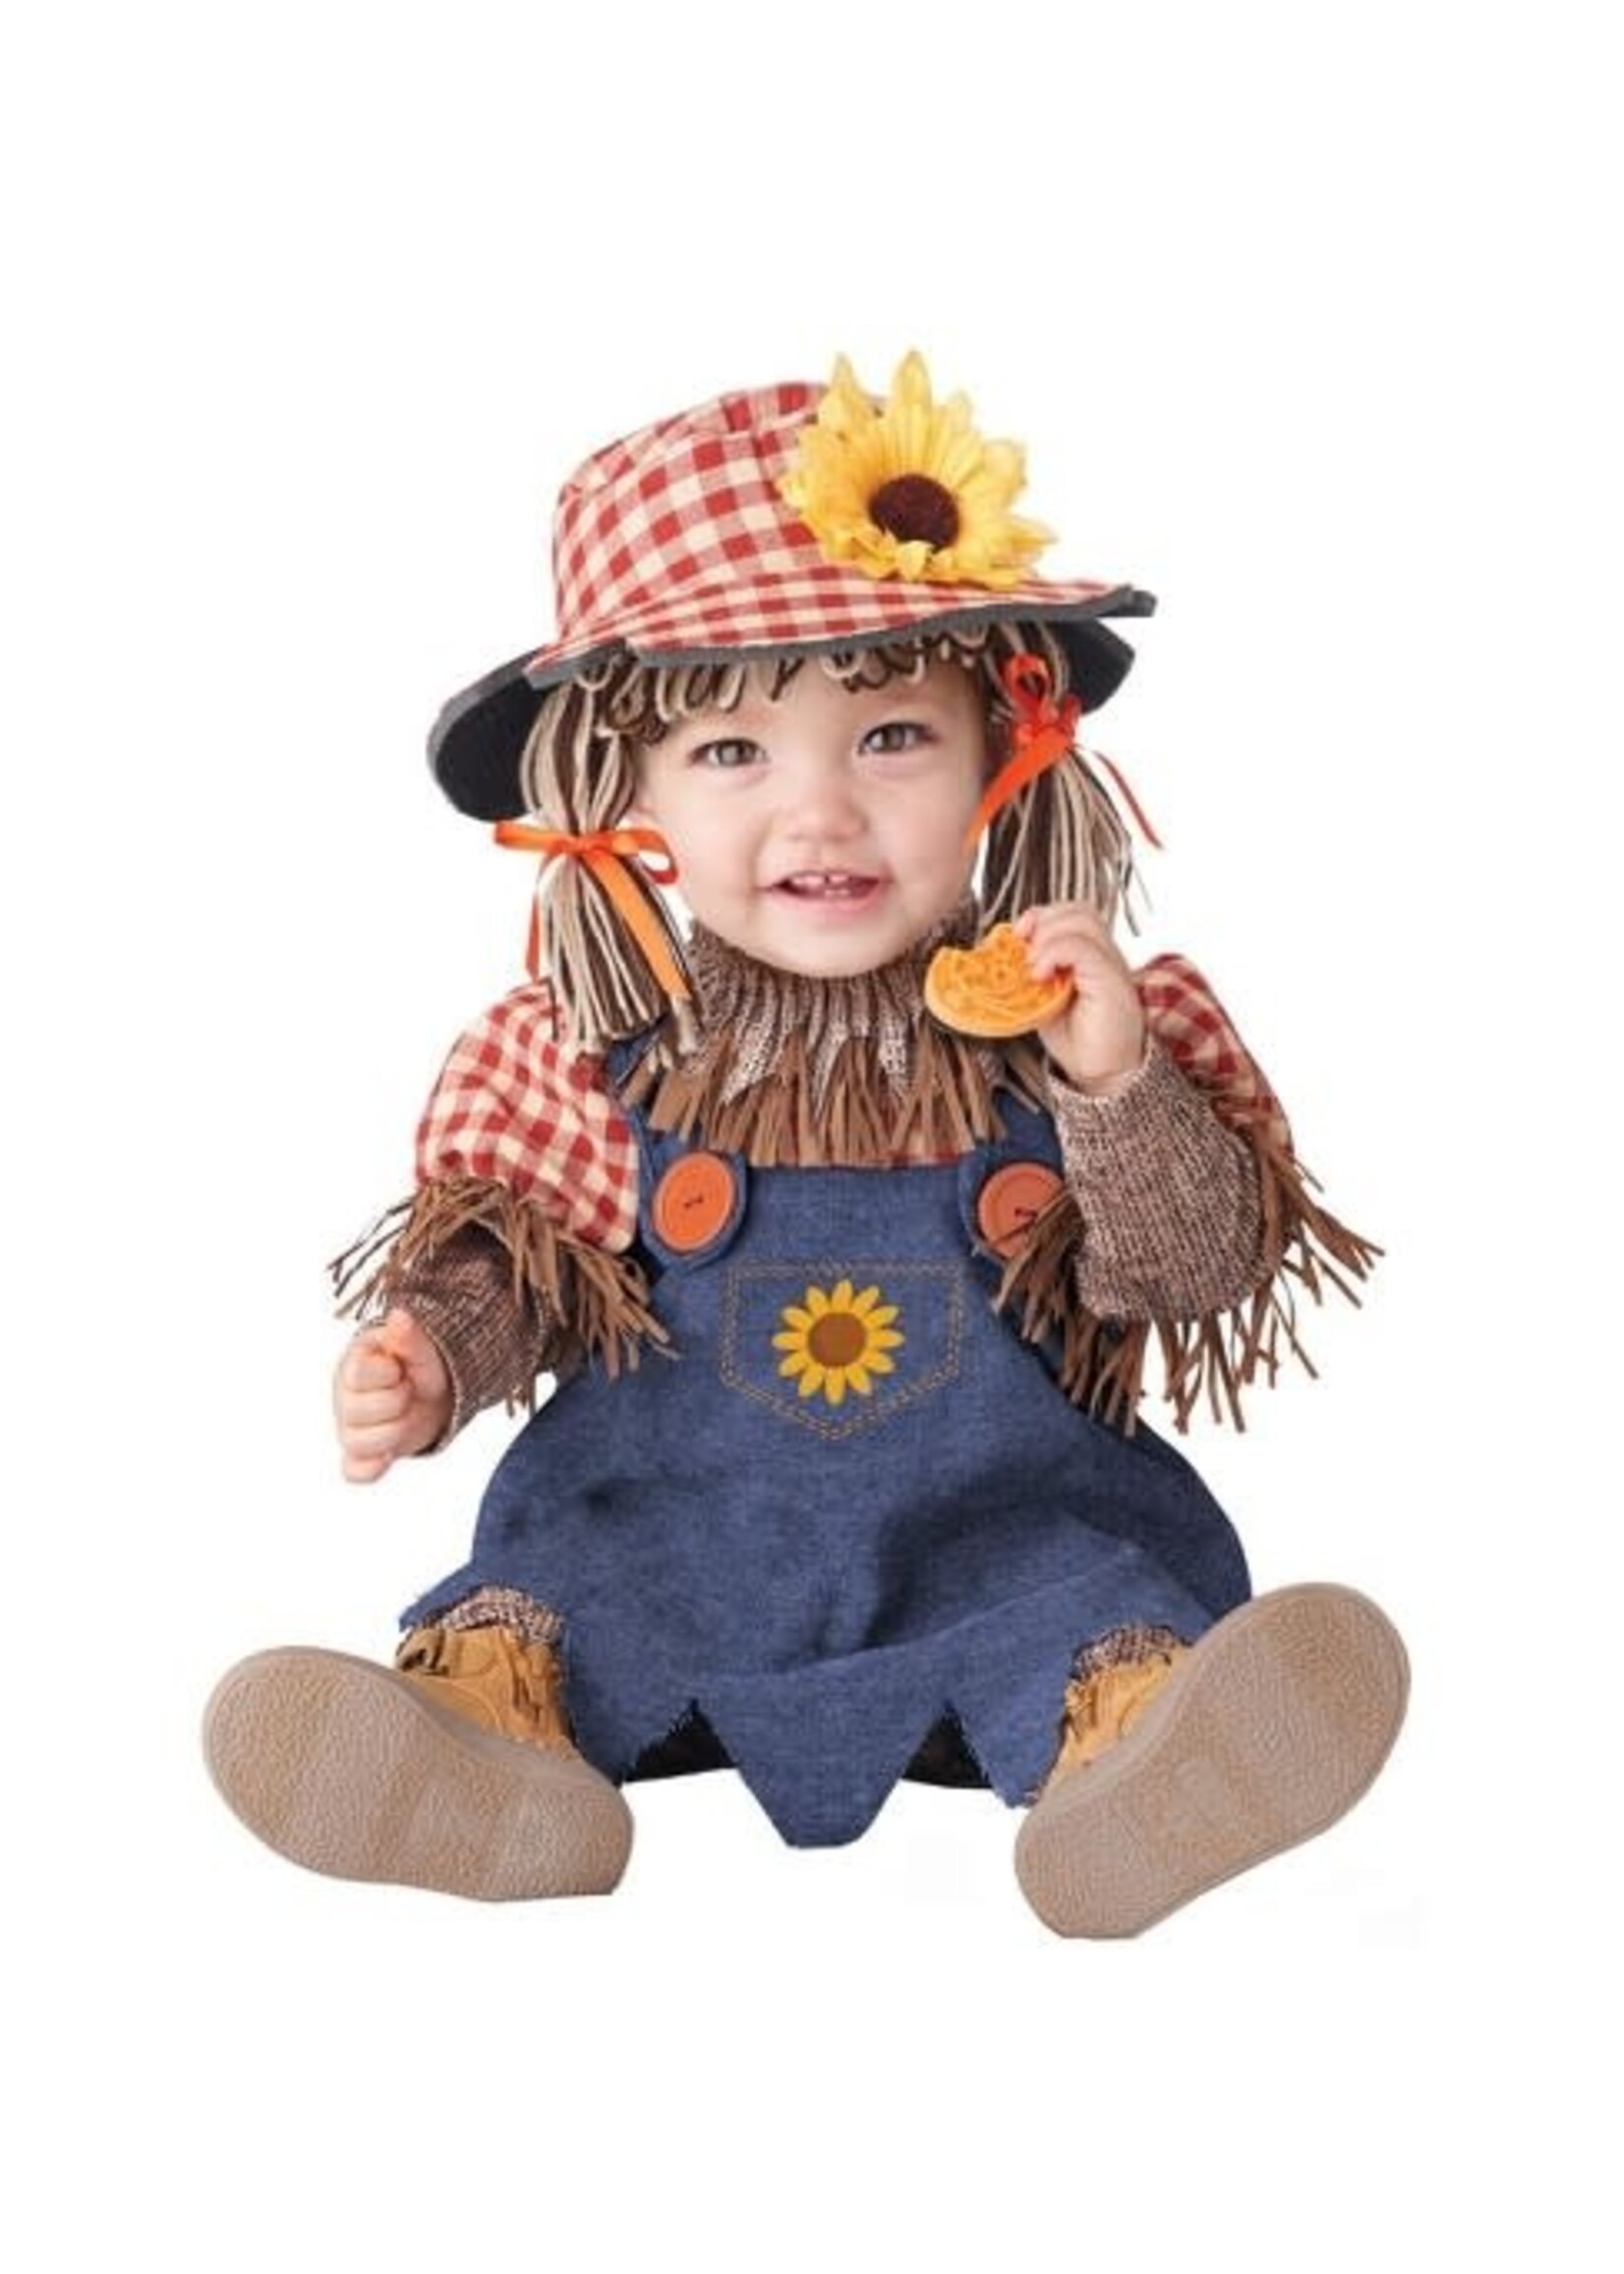 LIL' CUTE SCARECROW18-24 MO